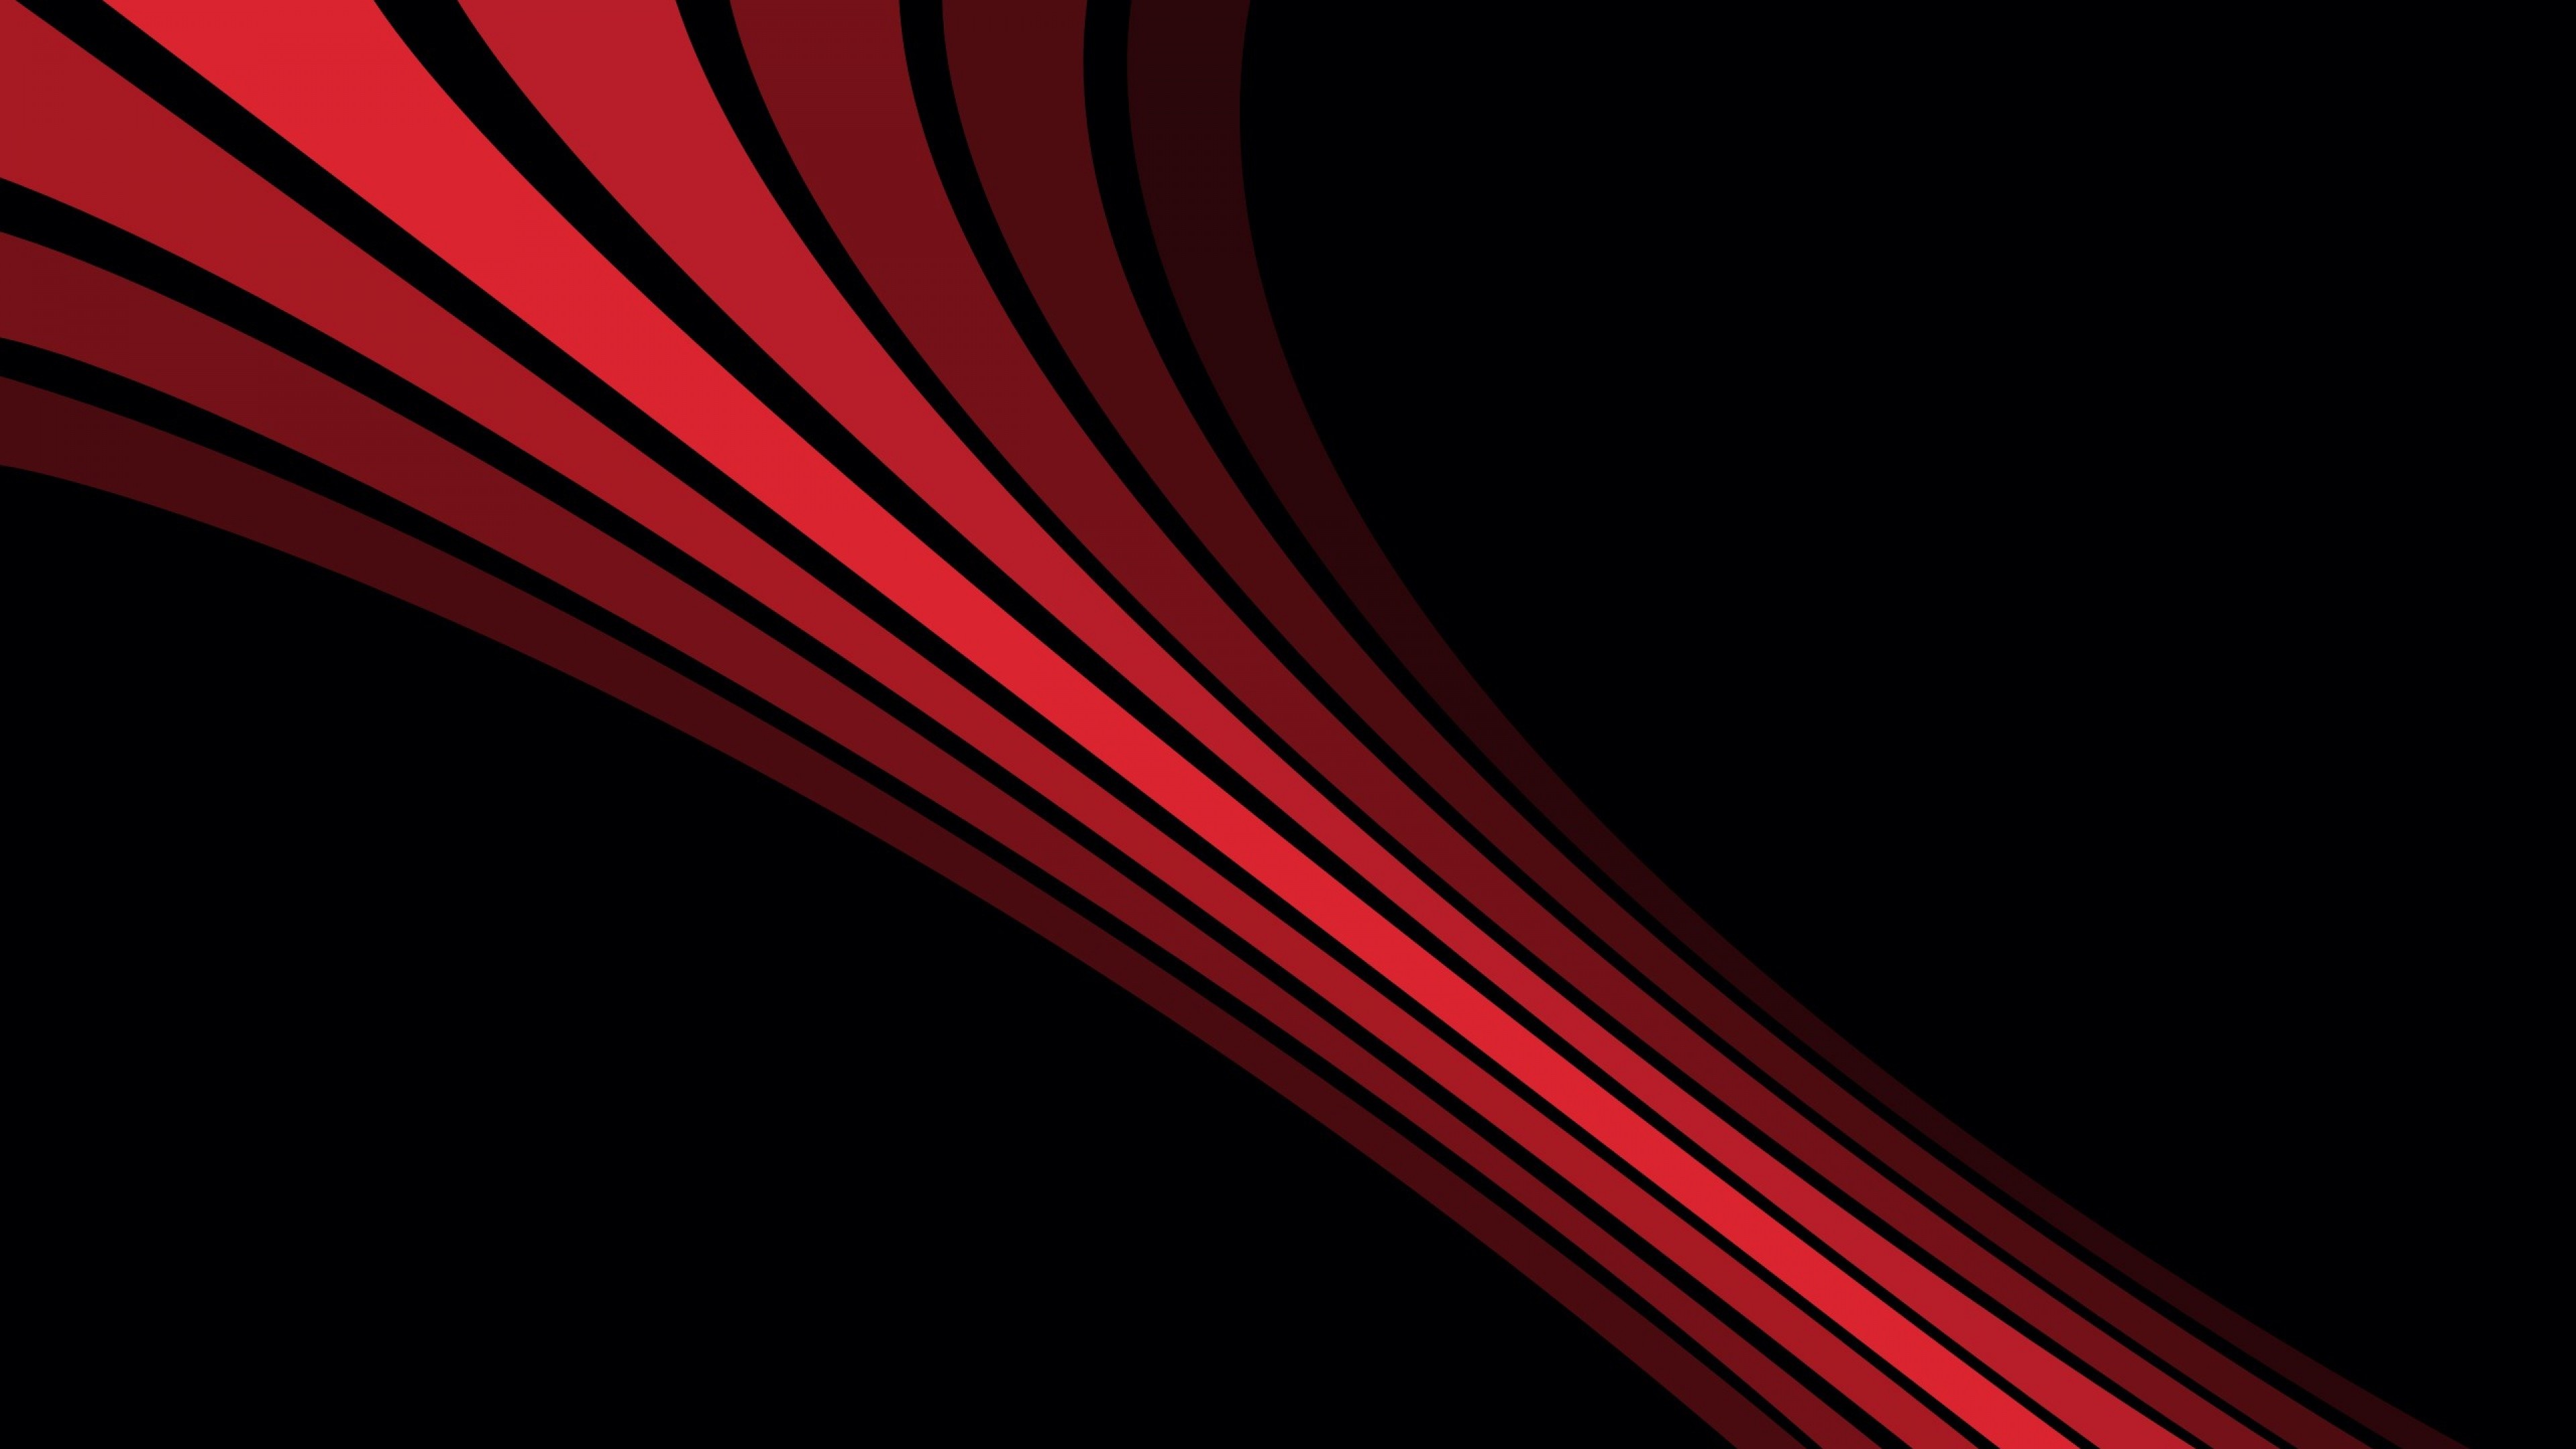 v2 Black and red abstract background wallpaper hd 4k